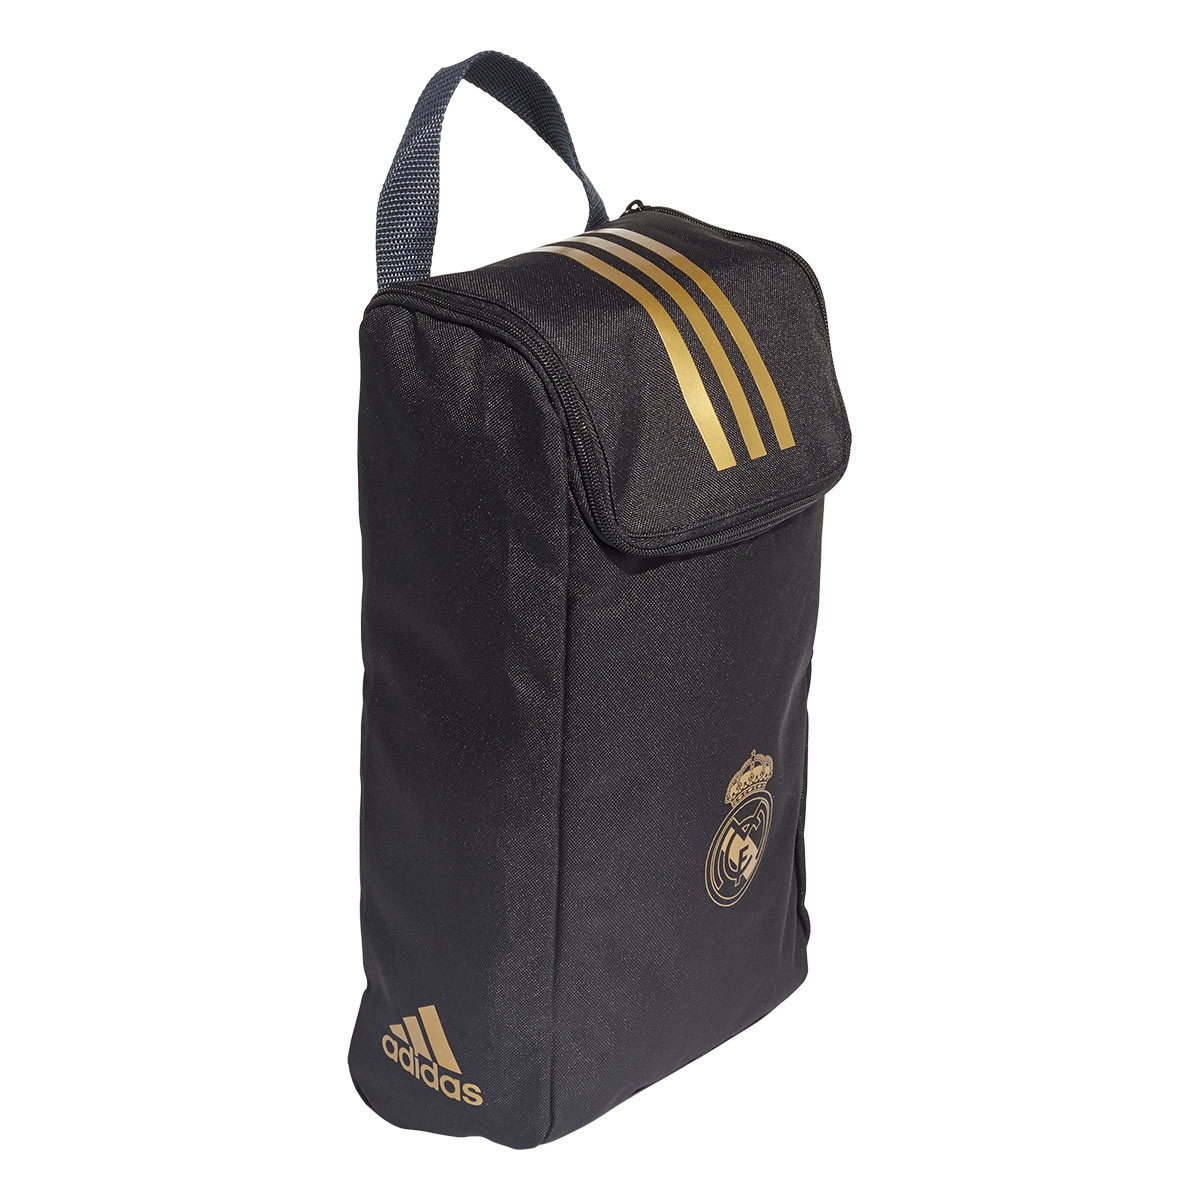 boot bags for football